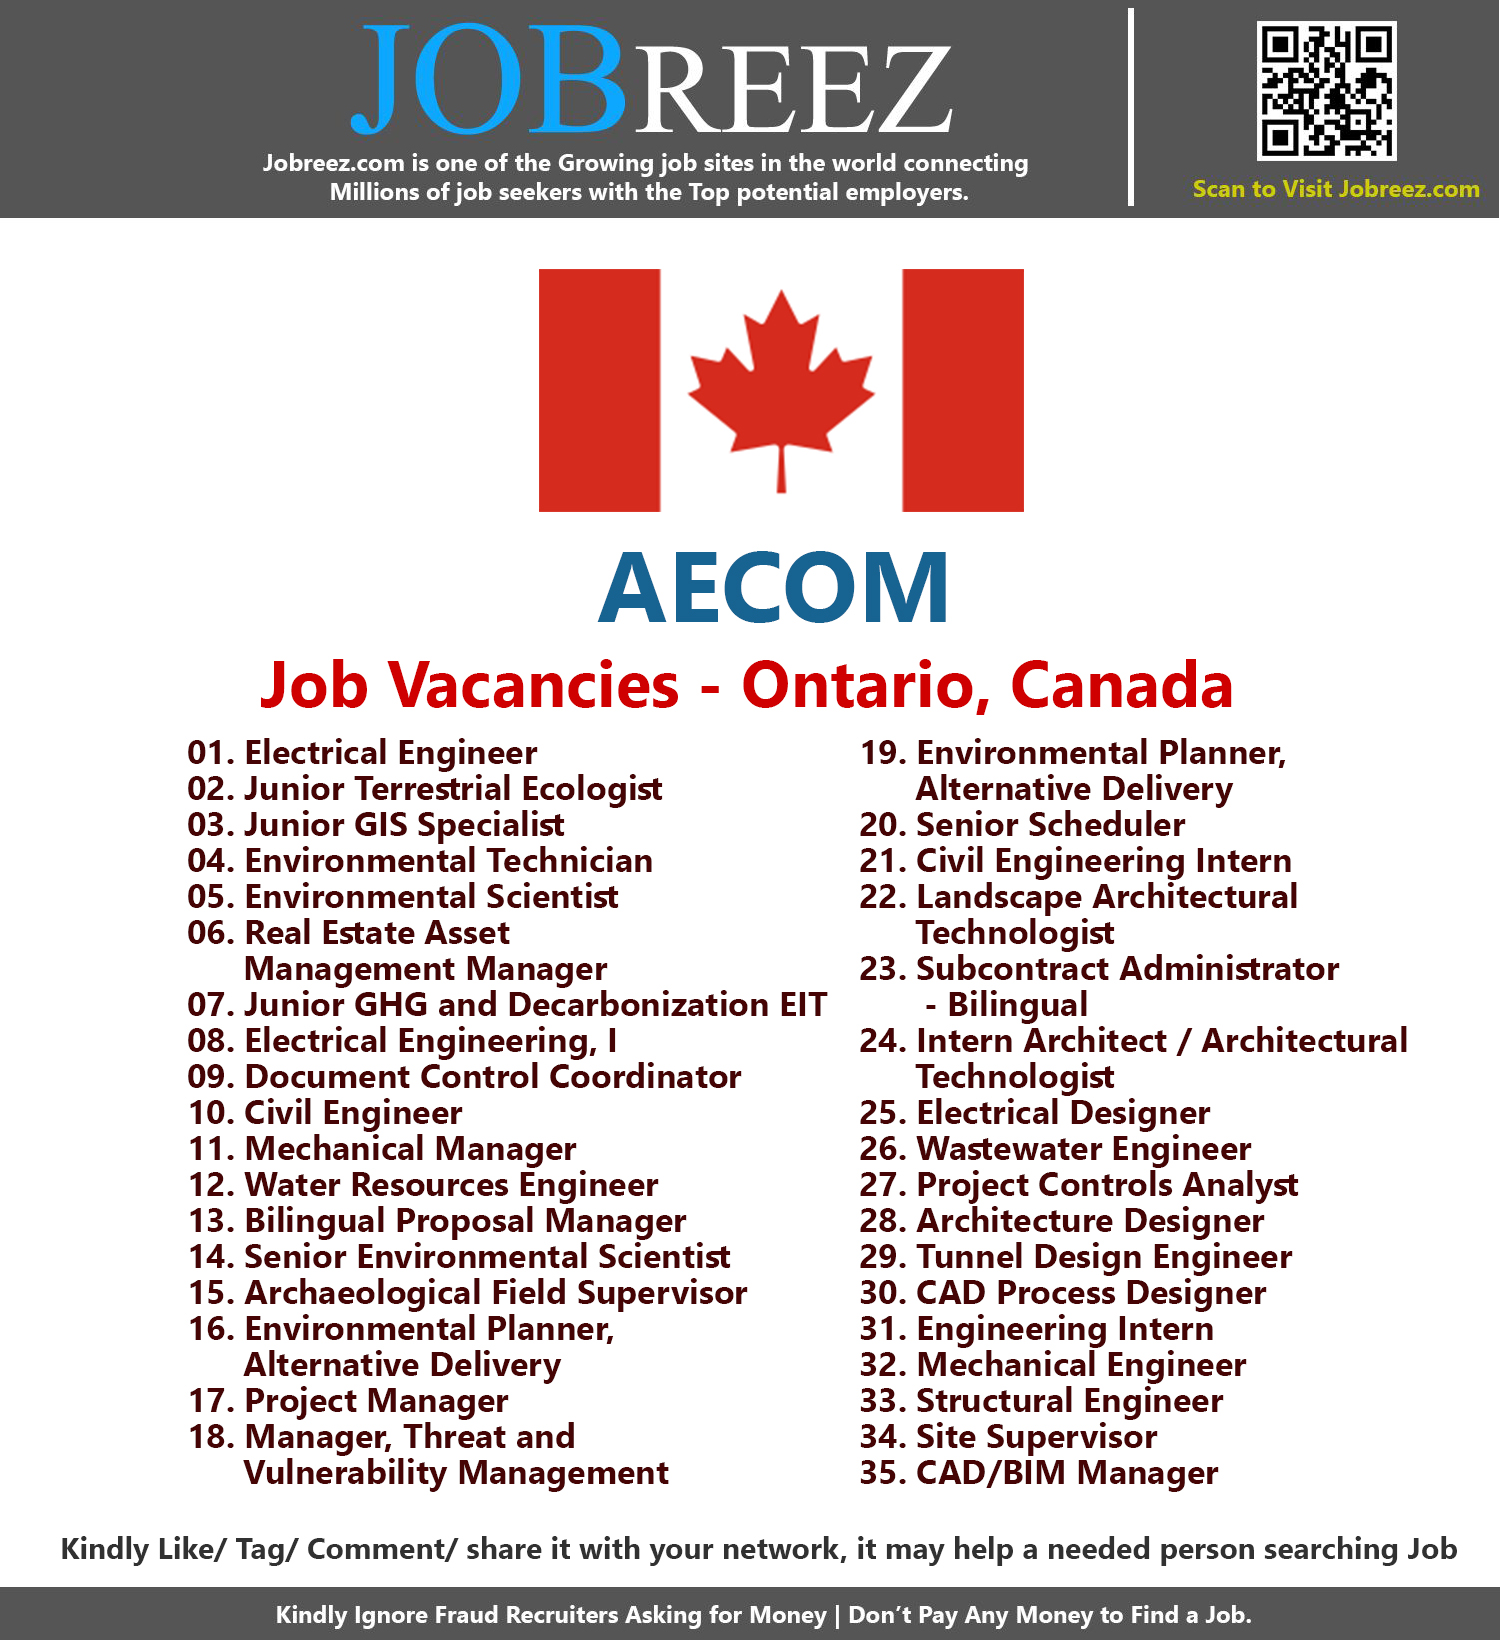 AECOM Job Vacancies - Ontario, Canada. Also, We are going to describe to you the ways to get a job in AECOM Job Vacancies - Ontario, Canada